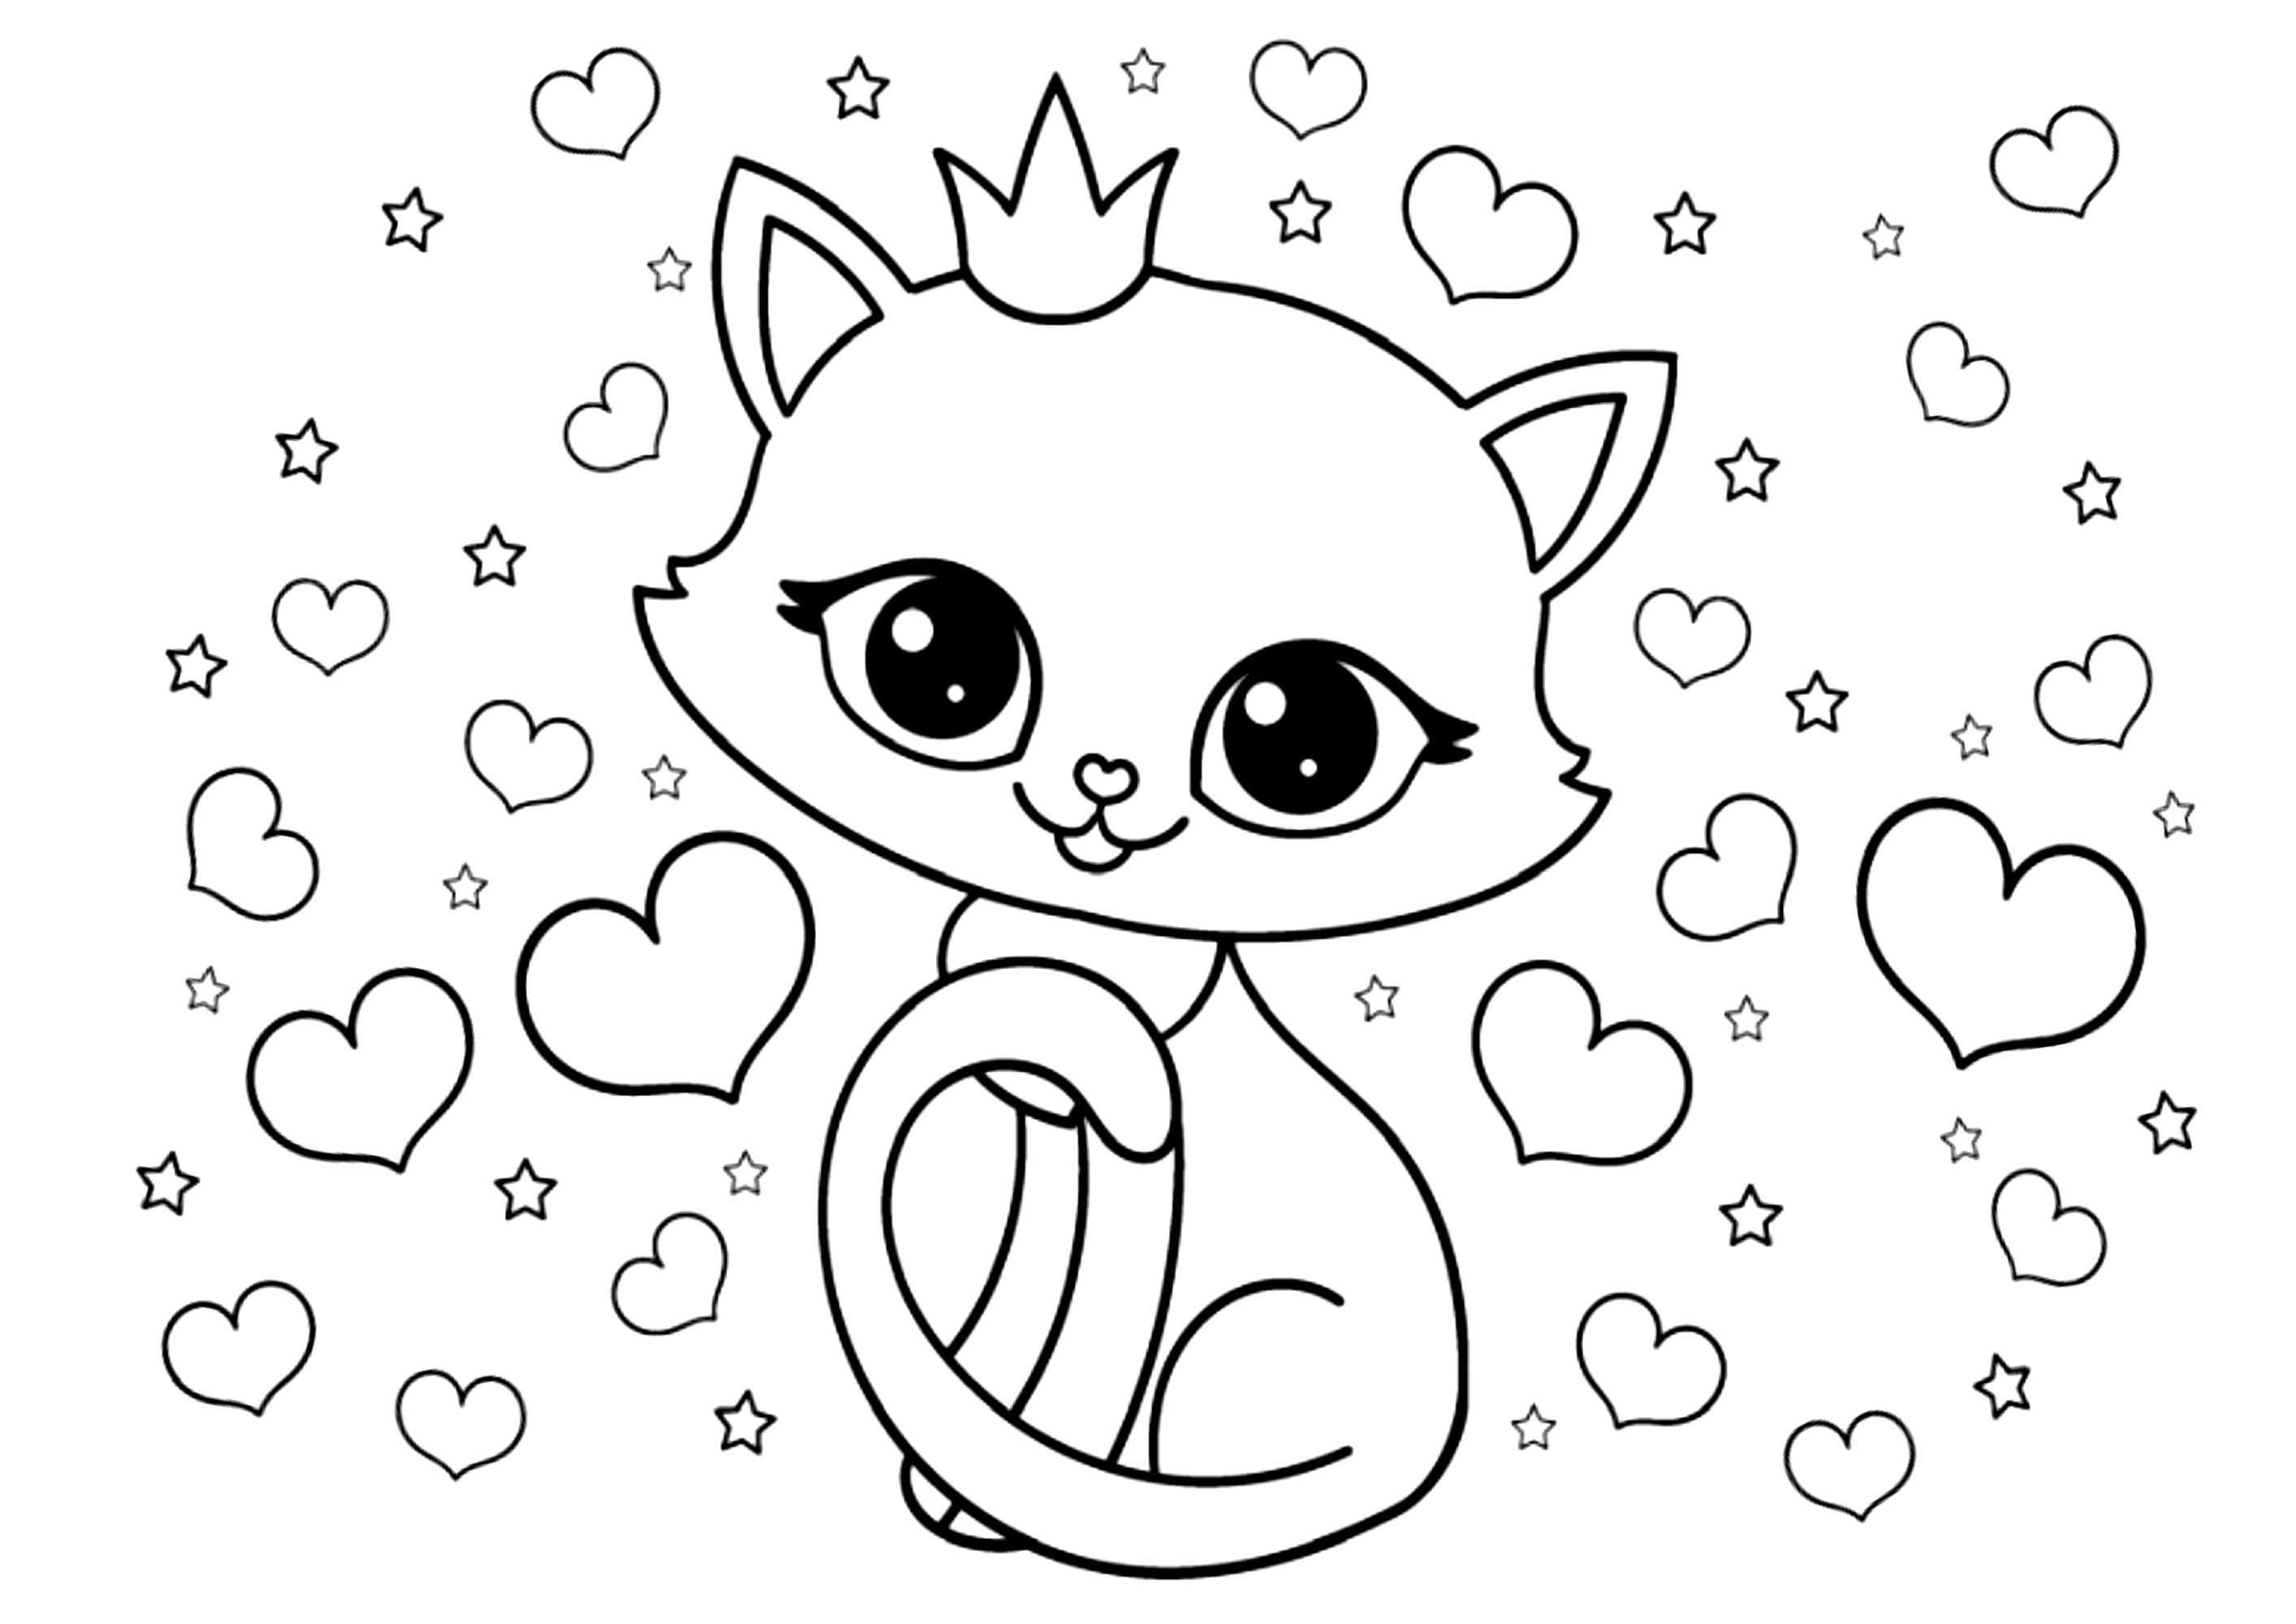 A cat princess surrounded by many hearts